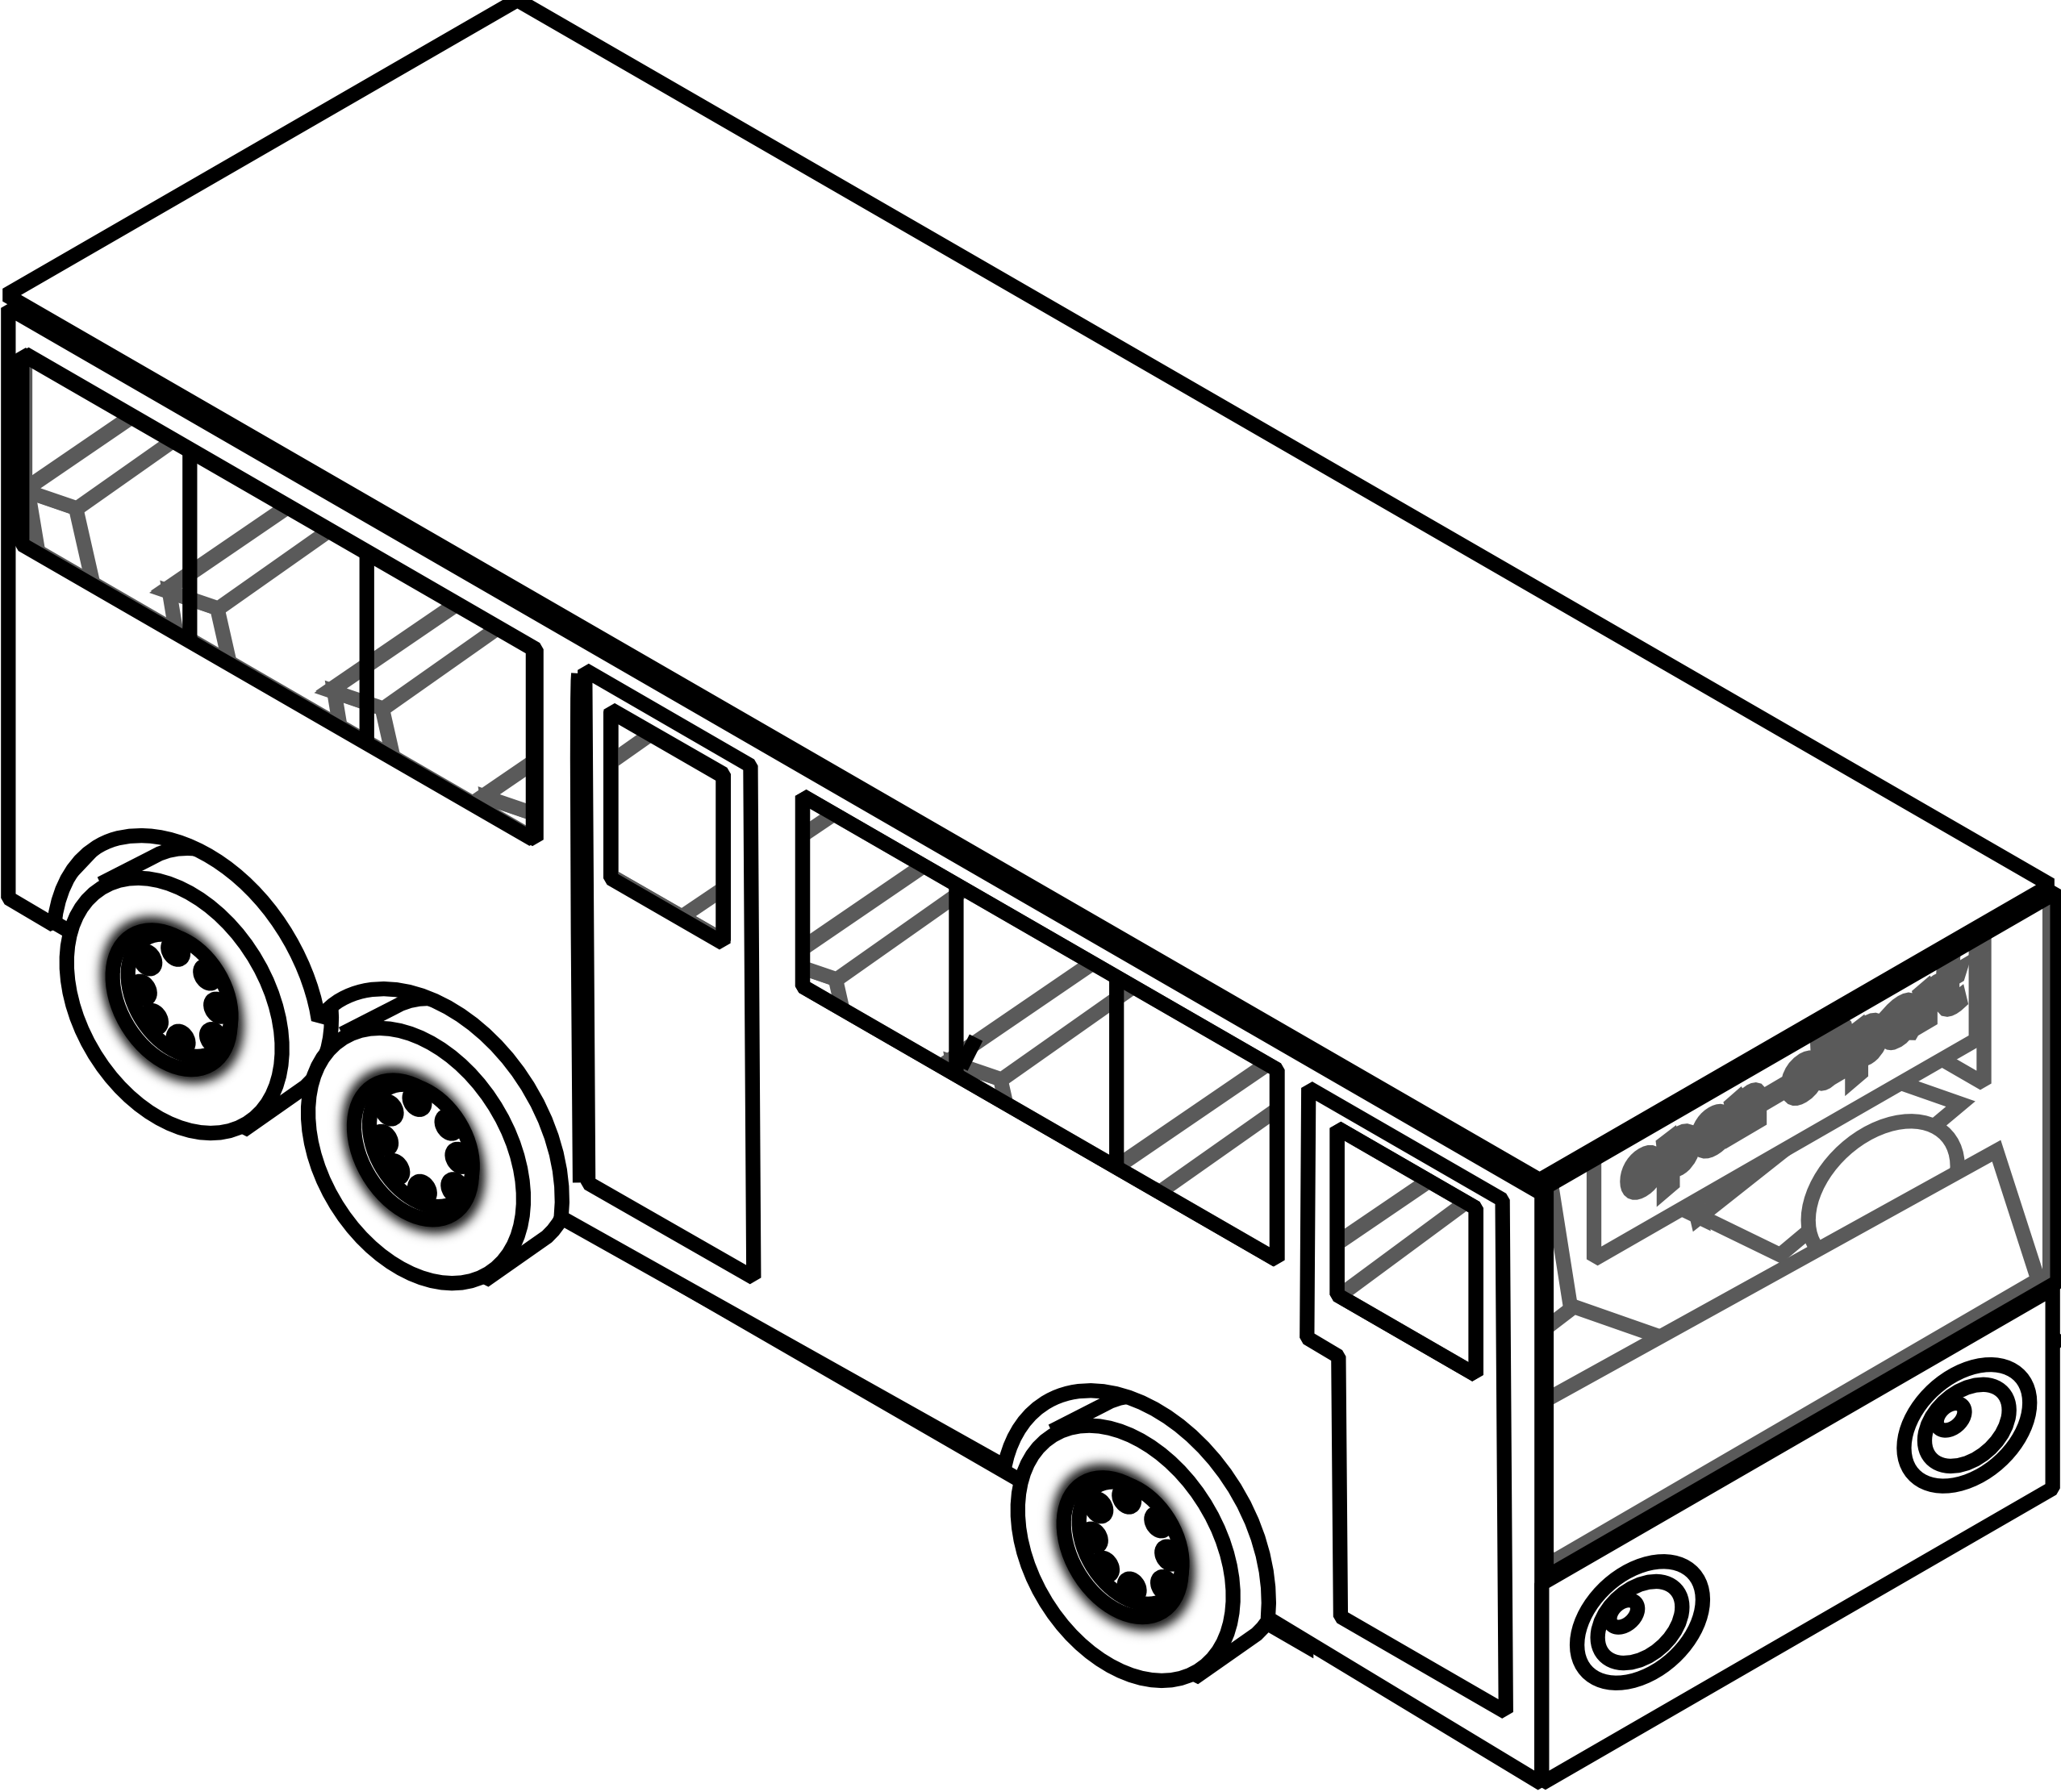 Car Black Black And White Car Drawings Free Download - Bus Black And White (2555x2222)